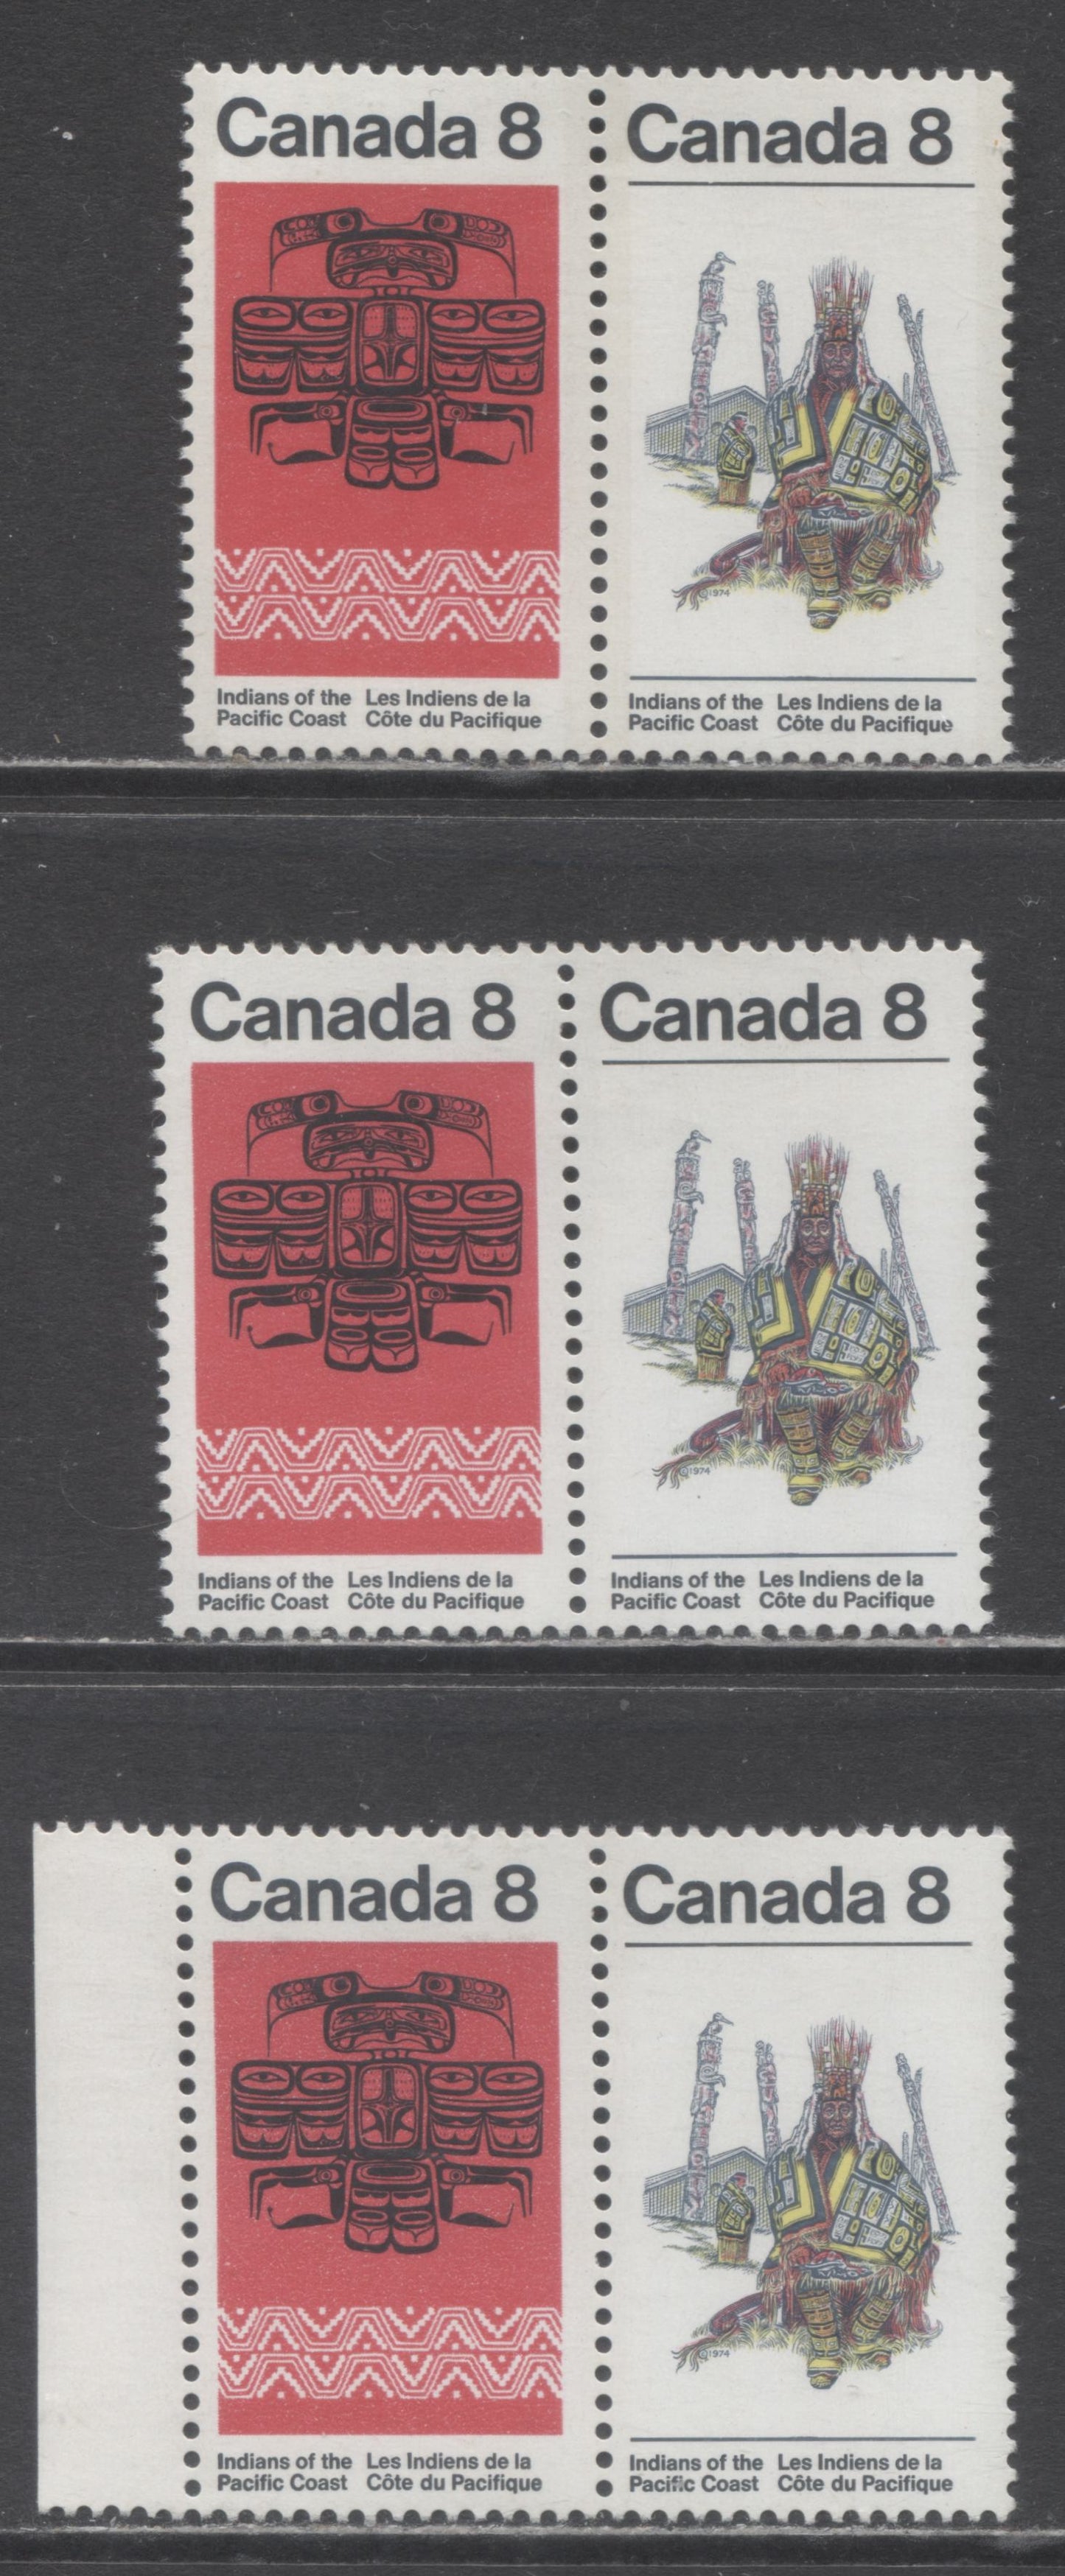 Lot 89 Canada #573avar 8c Multicolored Inside Of A Nootka & Pacific Coast Artifacts, 1974 Indians Issue, 2 VFNH Horizontal Pairs On LF/LF Papers With Strong 4mm Tagging & Weak 3mm Tagging, 3mm Width Being Unlisted In Unitrade